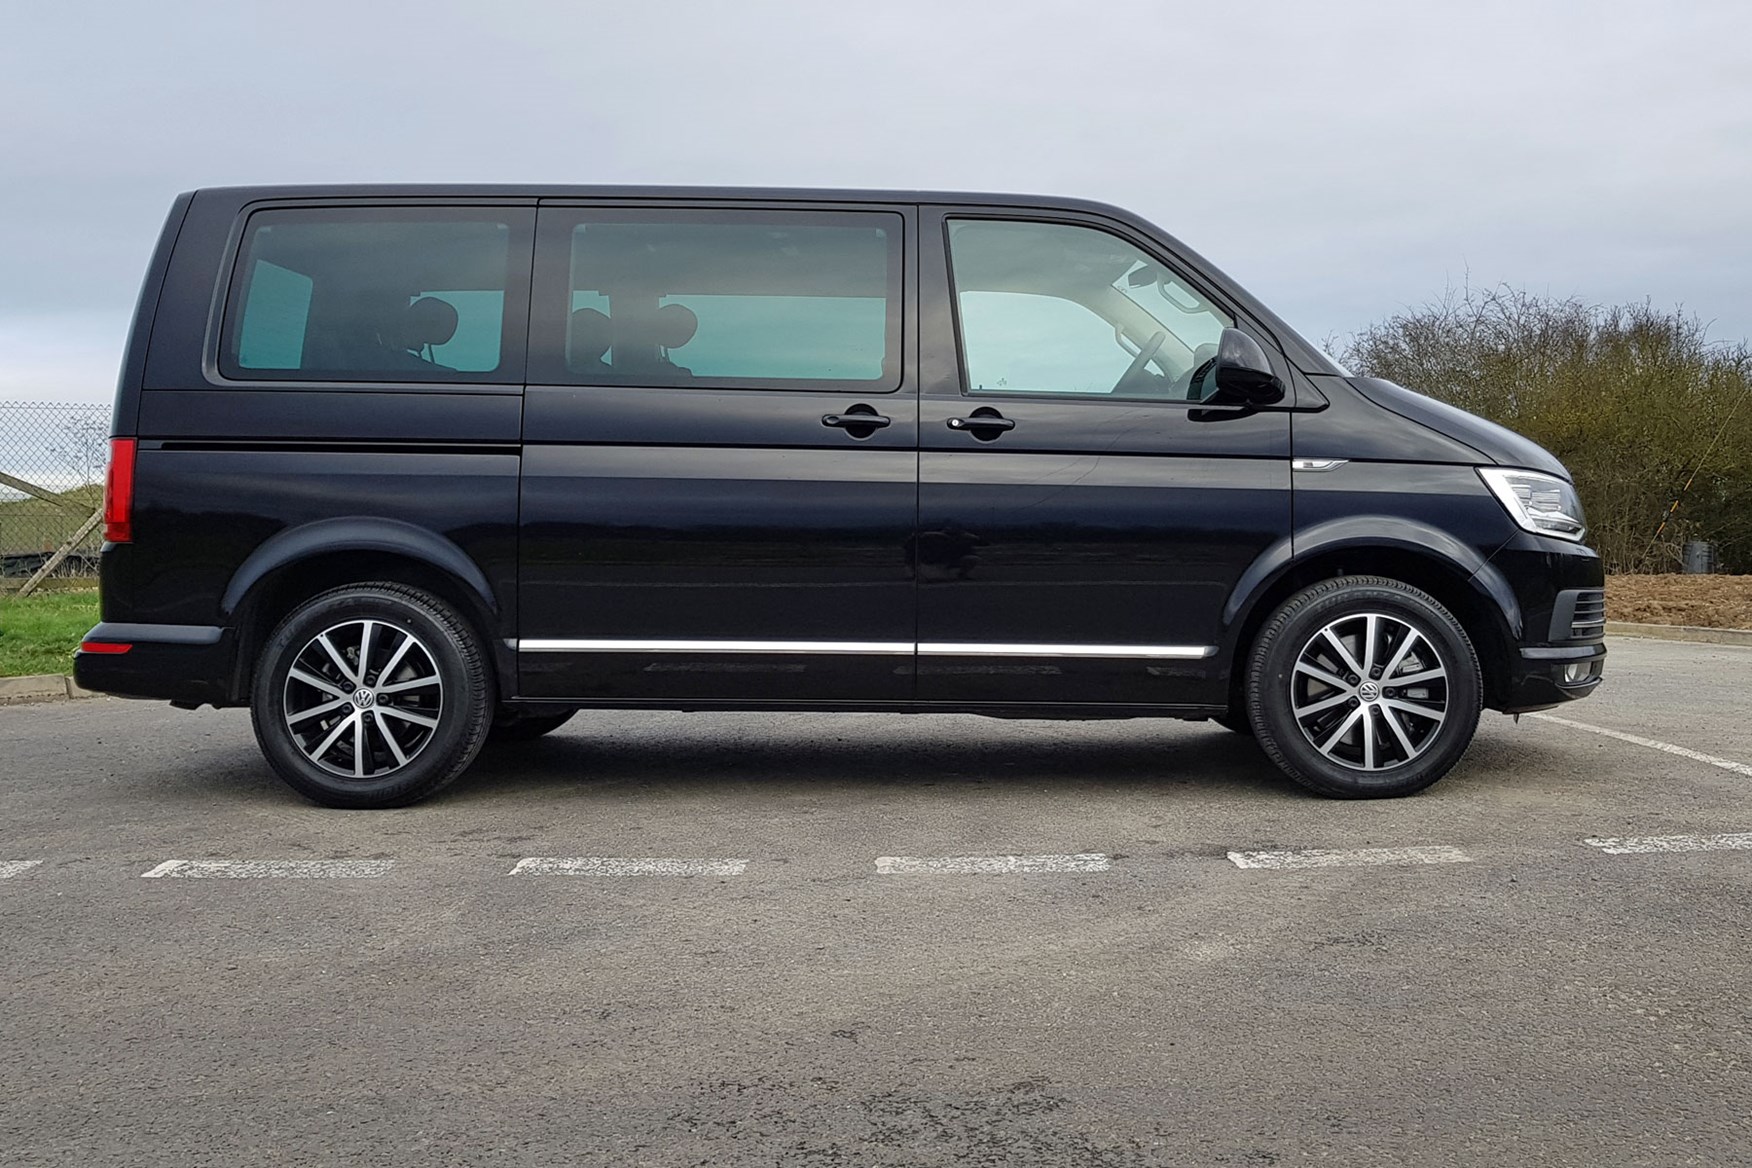 Is the best family car actually a van 